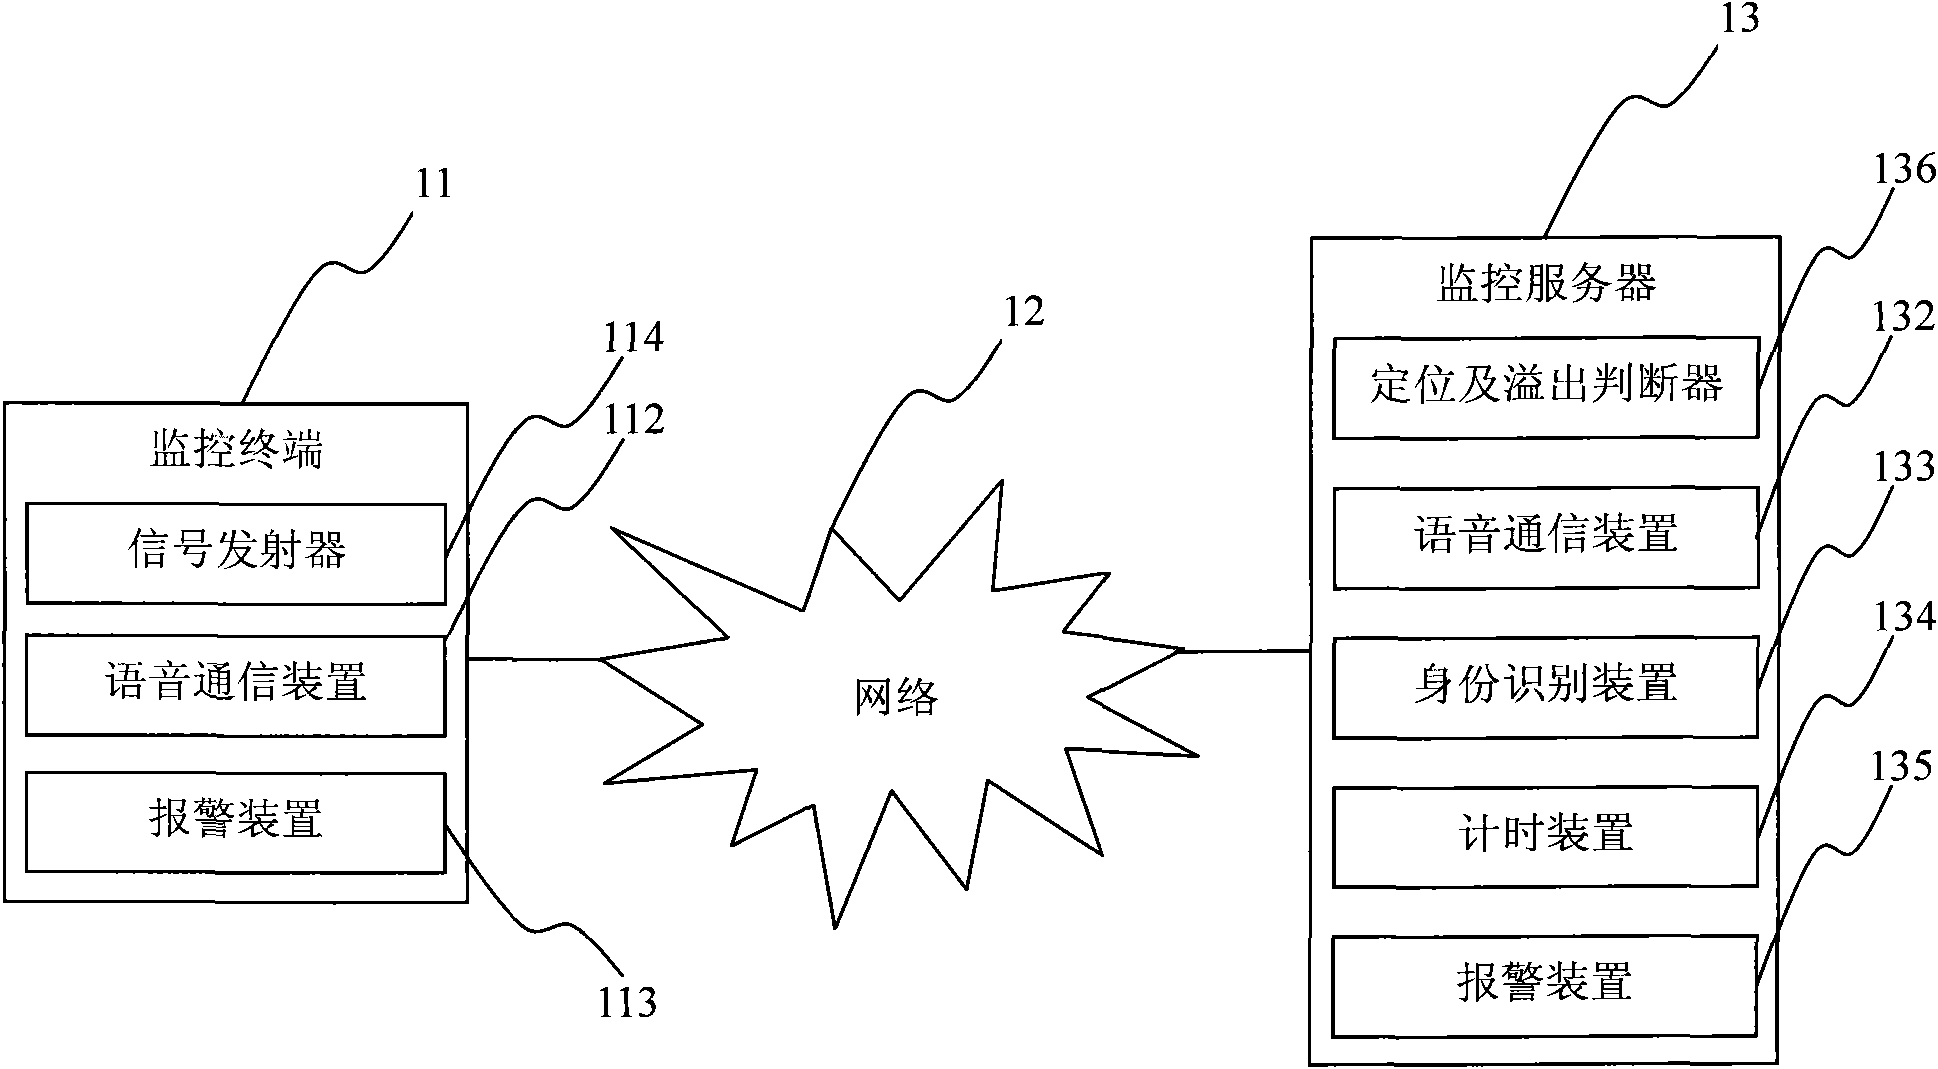 Monitoring system based on voiceprint authentication